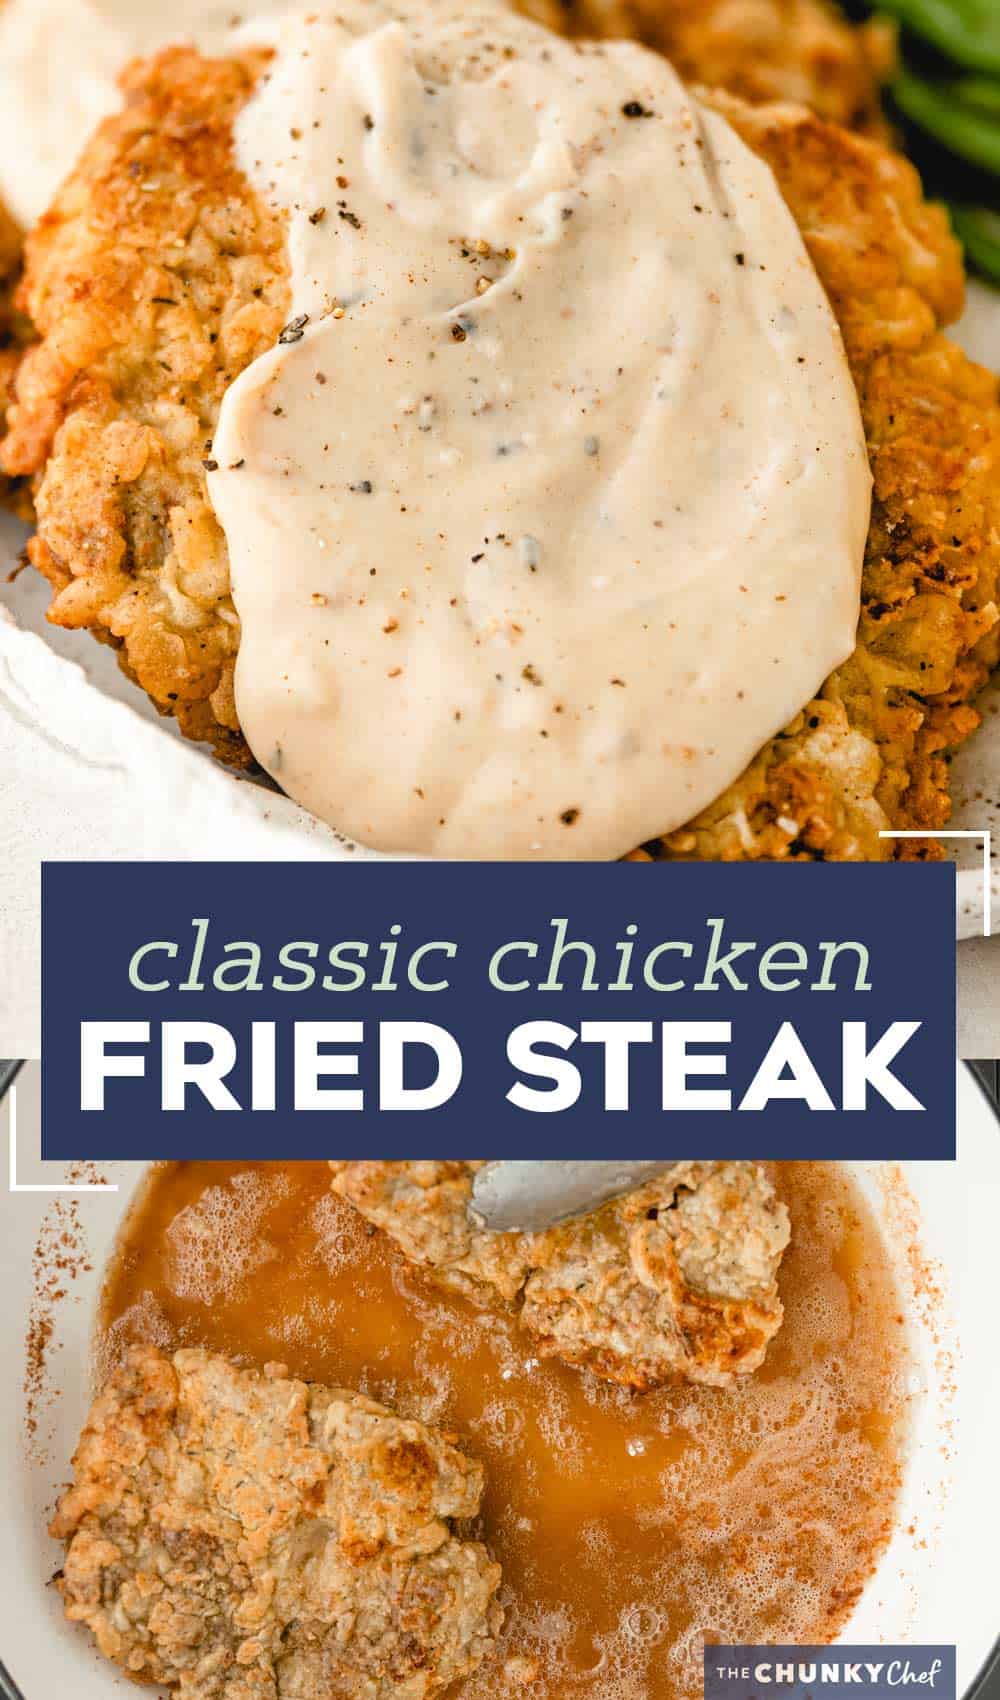 Chicken Fried Steak - The Chunky Chef